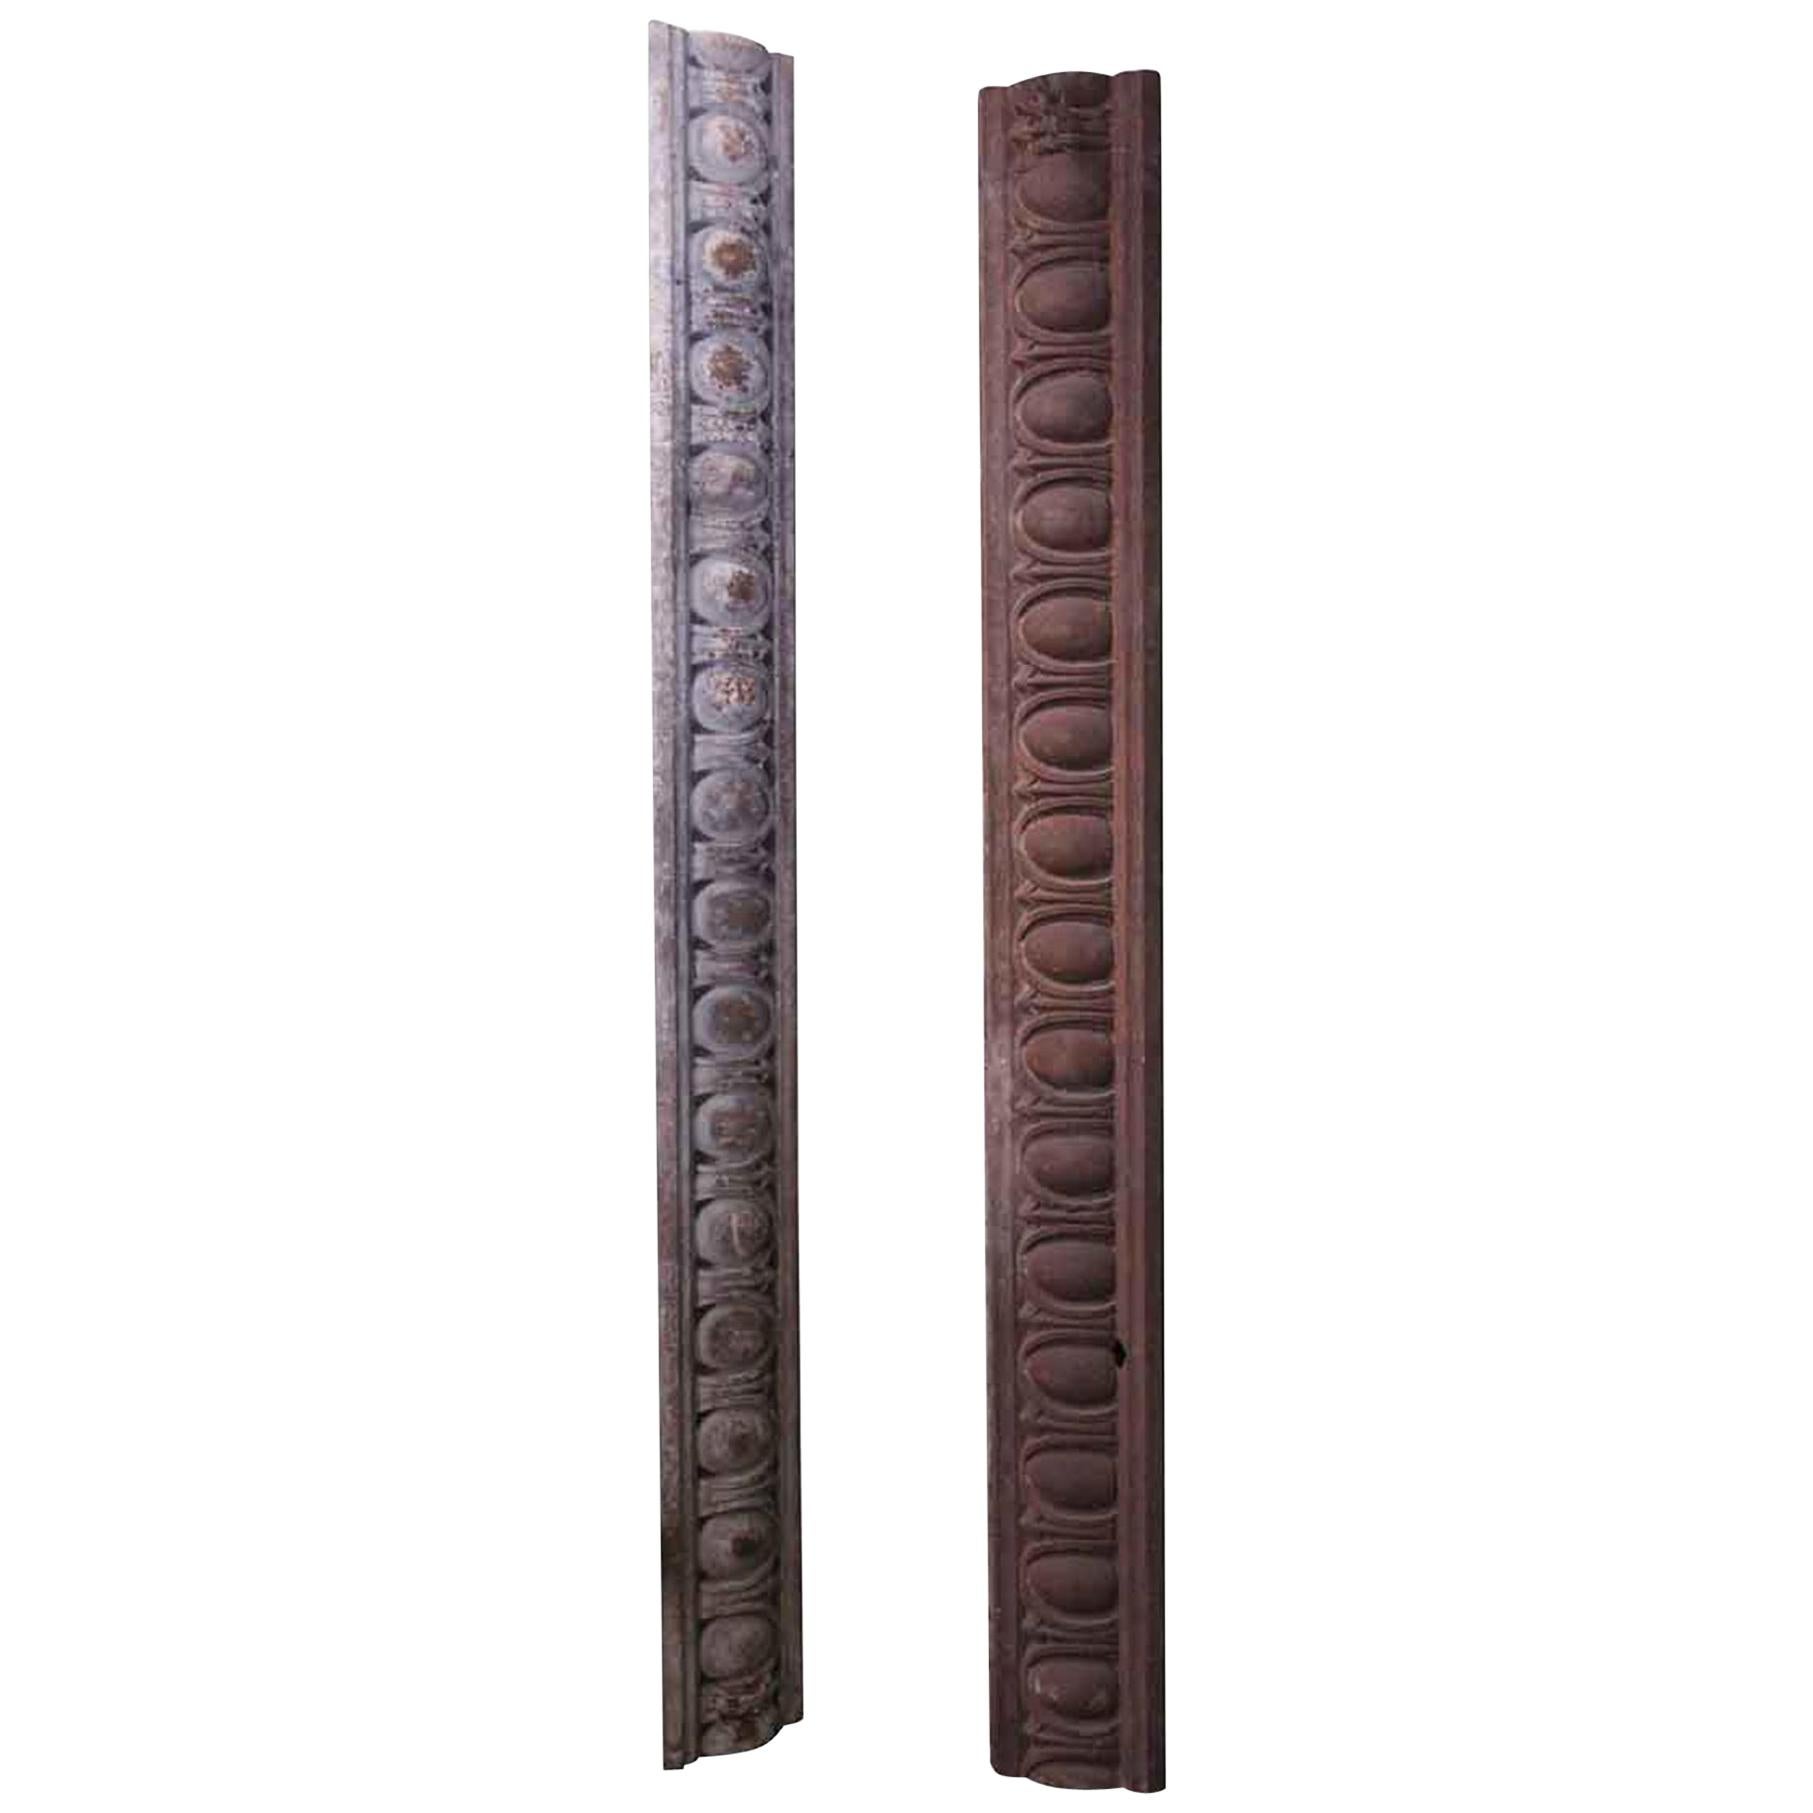 1880s Pair of Cast Iron Lintels or Roof Trim with Egg and Dart Design